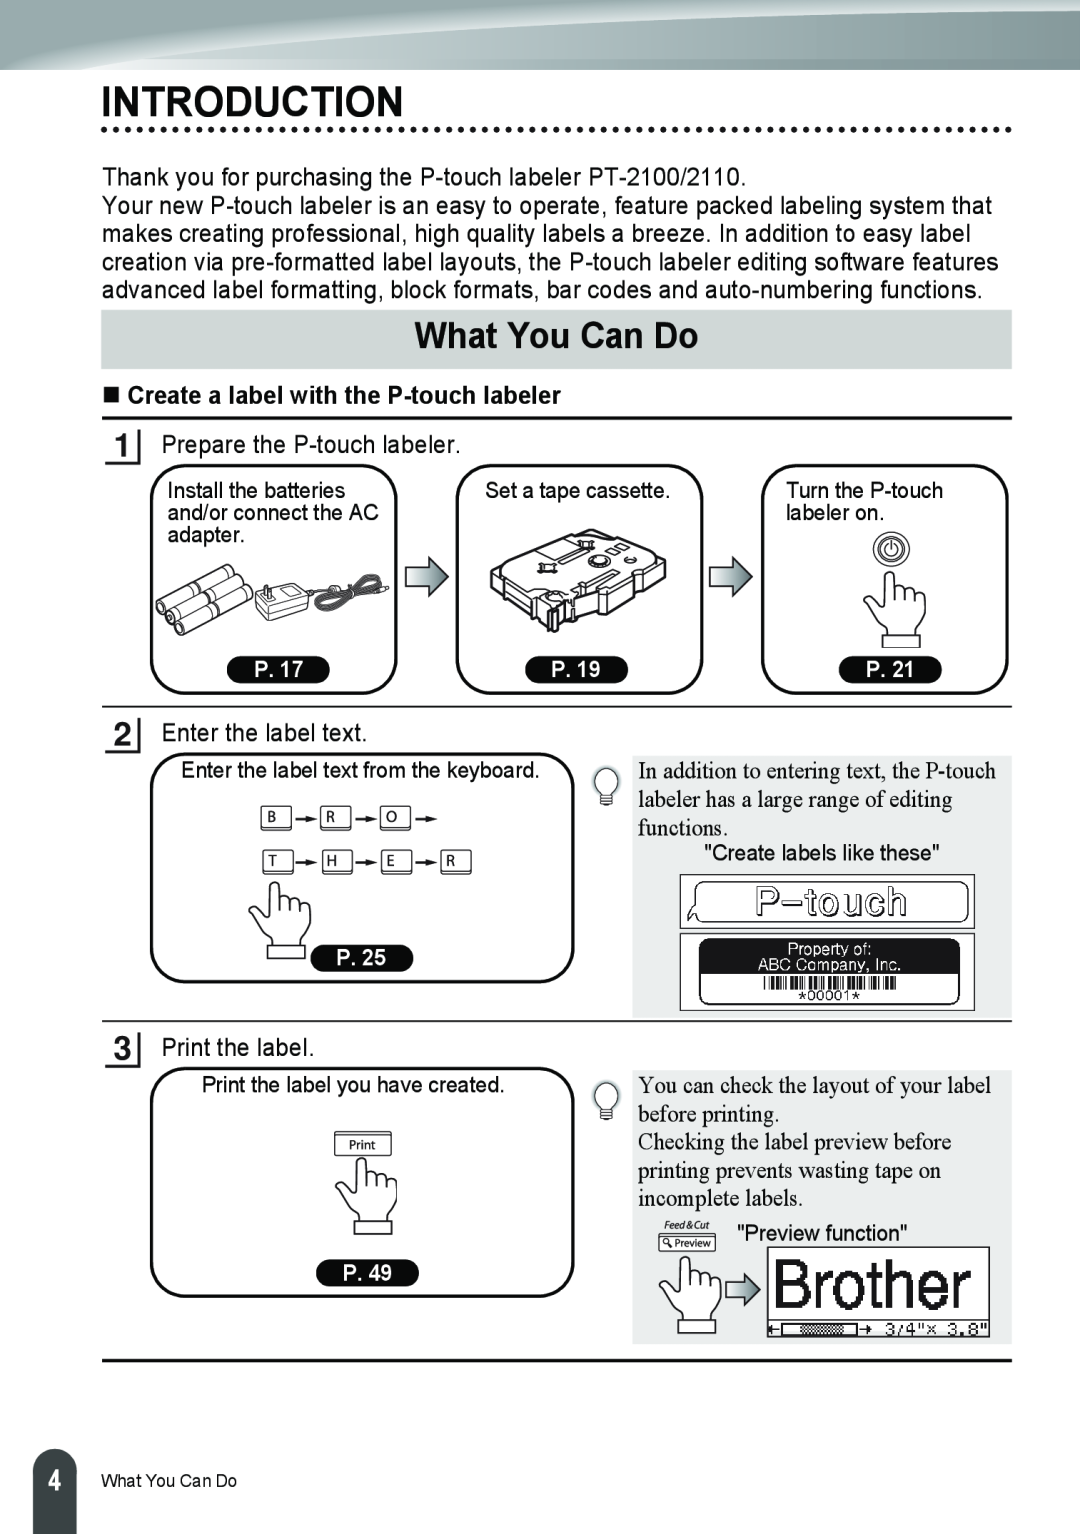 Brother PT-2110, PT-2100 manual Introduction, What You Can Do, „ Create a label with the P-touch labeler 